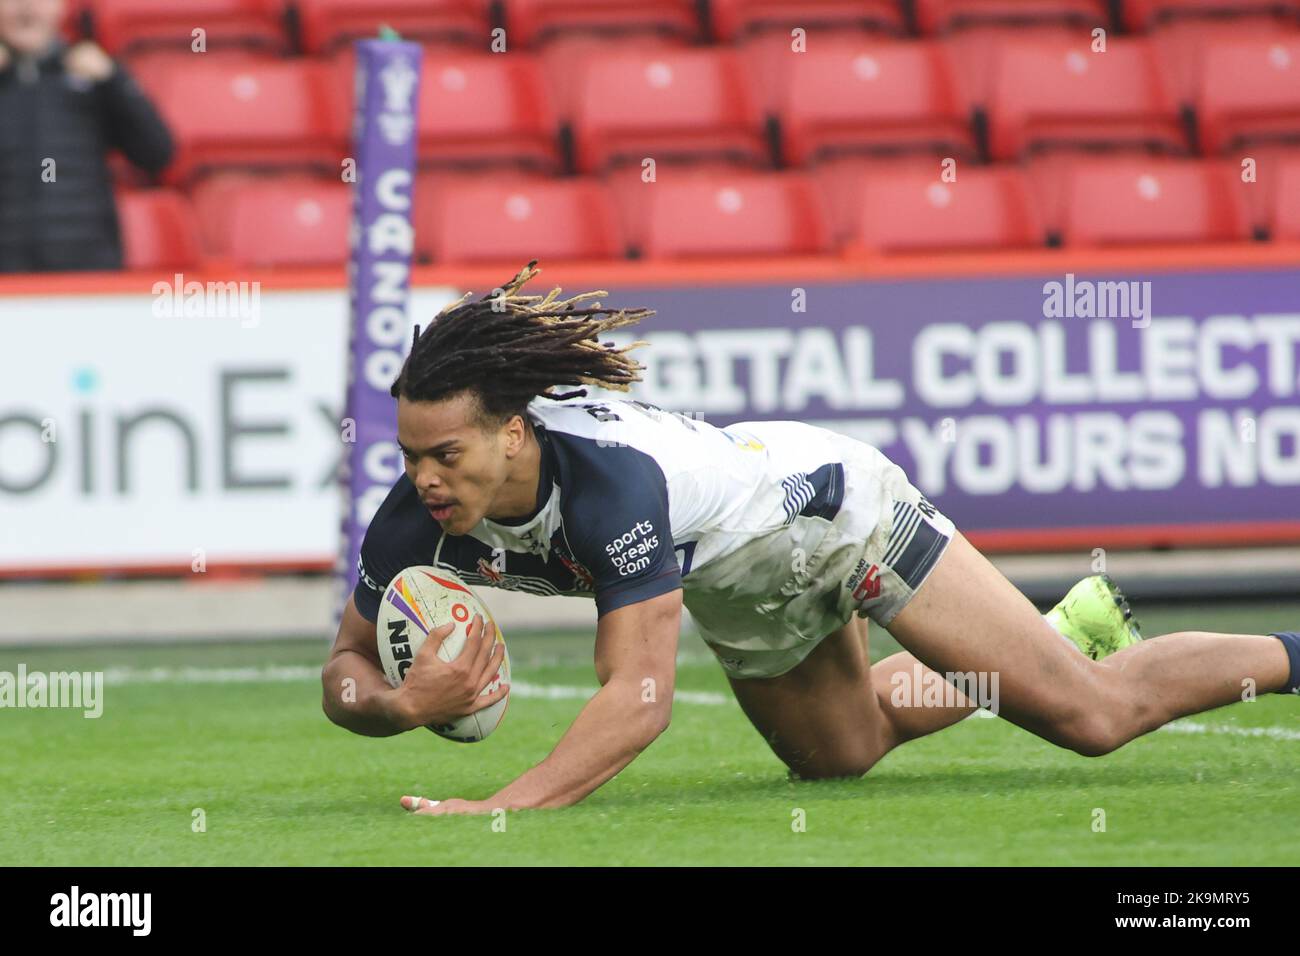 Sheffield, UK. 29th Oct, 2022. Bramall Lane, Sheffield, South Yorkshire, 29th October 2022. Rugby League 2021 World Cup England Rugby League vs Greek Rugby League Dom Young dives over to score his 3rd try of the game against Greece Rugby League Credit: Touchlinepics/Alamy Live News Stock Photo